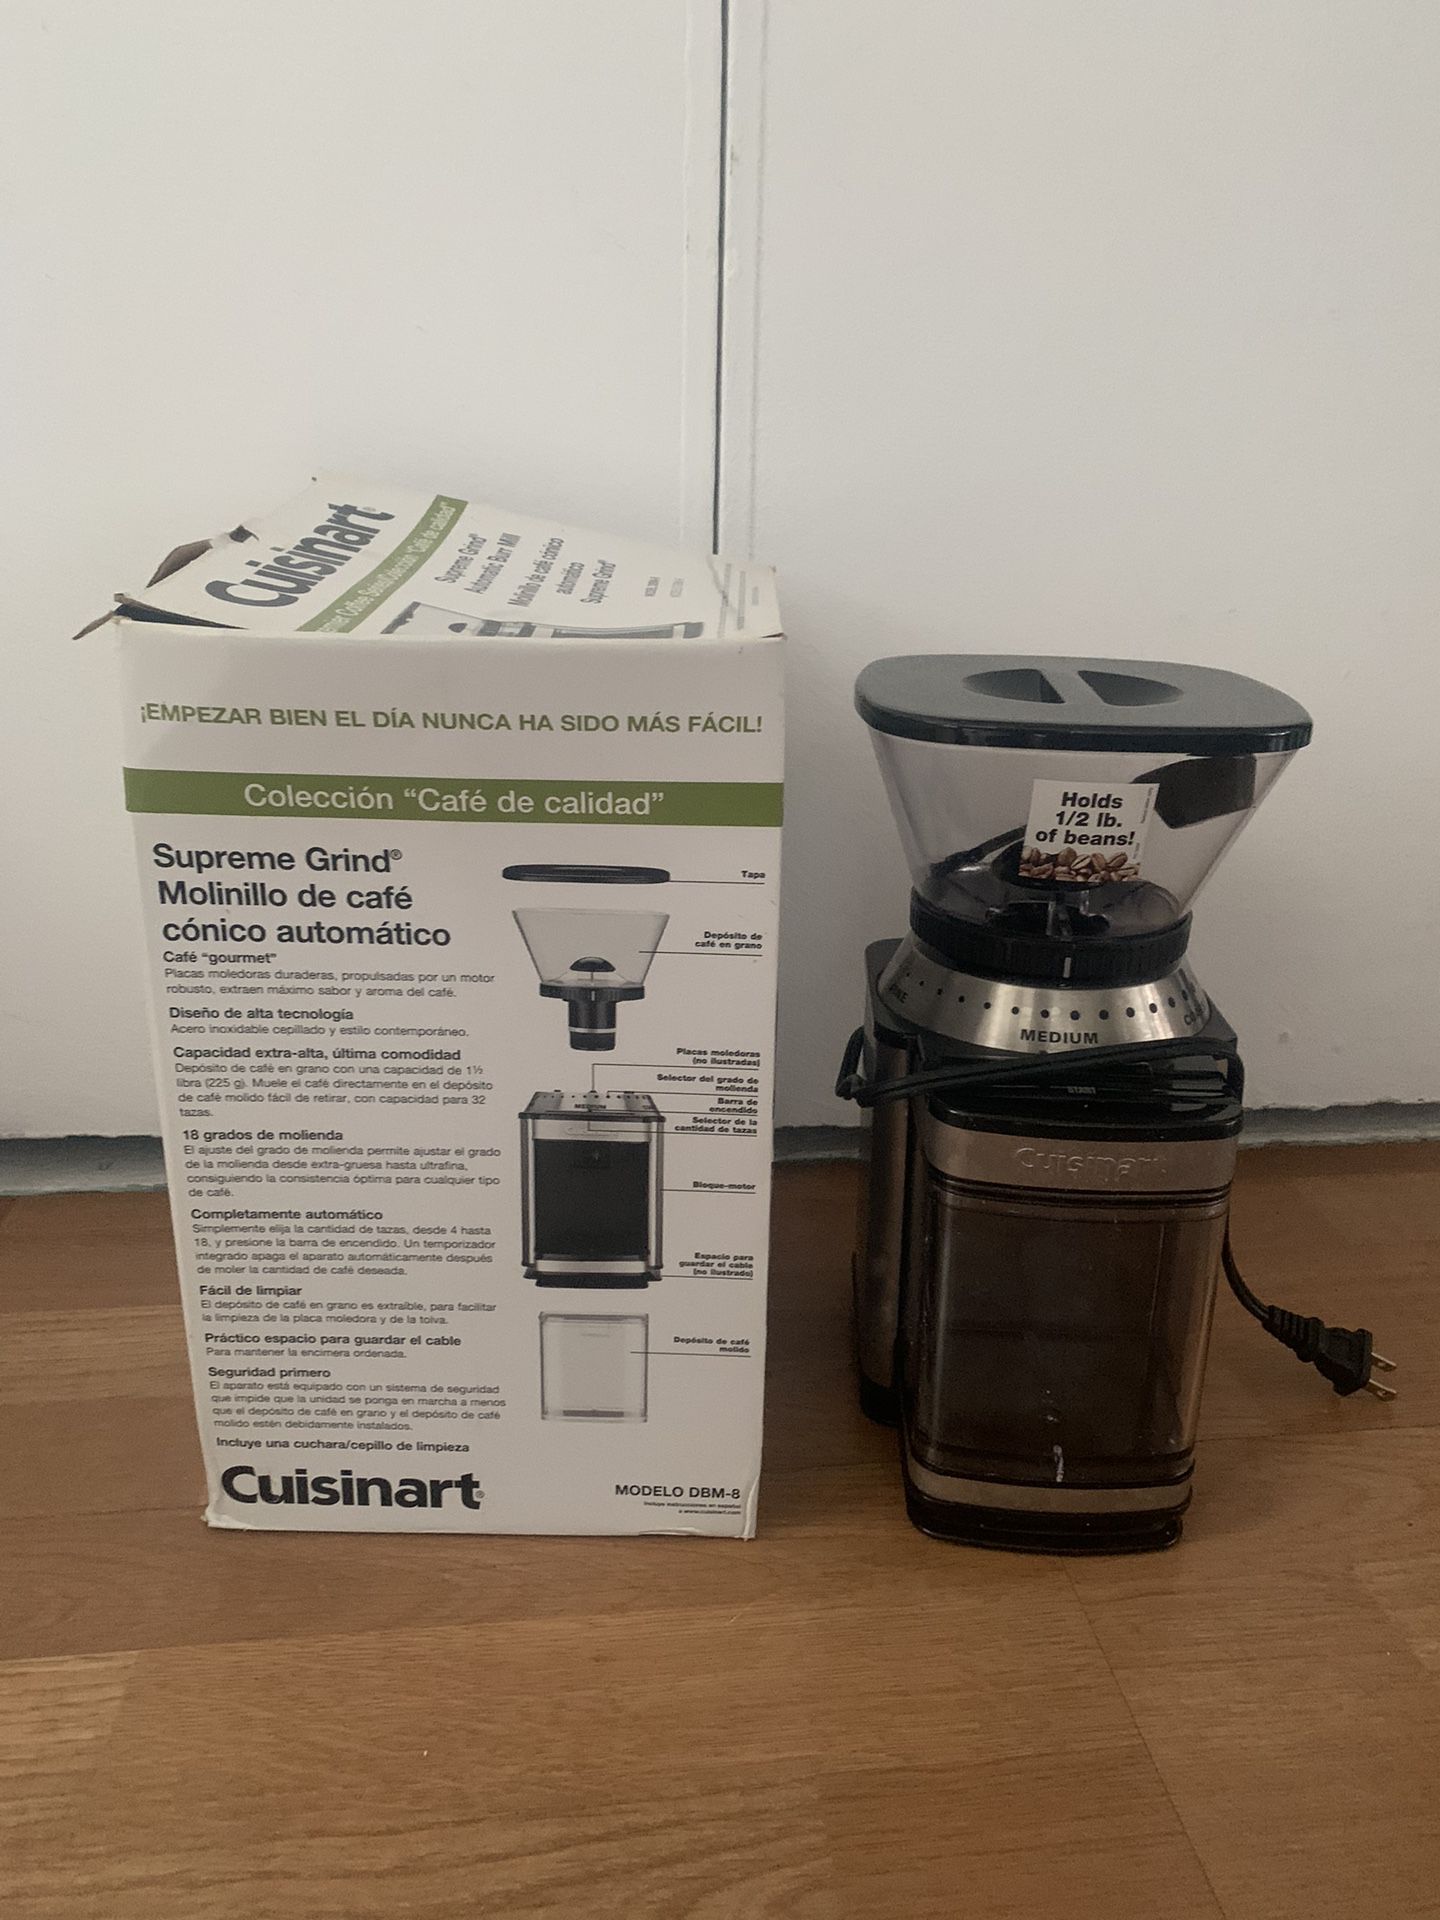 Cuisinart Coffee Grinder, Electric Burr One-Touch Automatic Grinder with18-Position Grind Selector, Stainless Steel, DBM-8P1